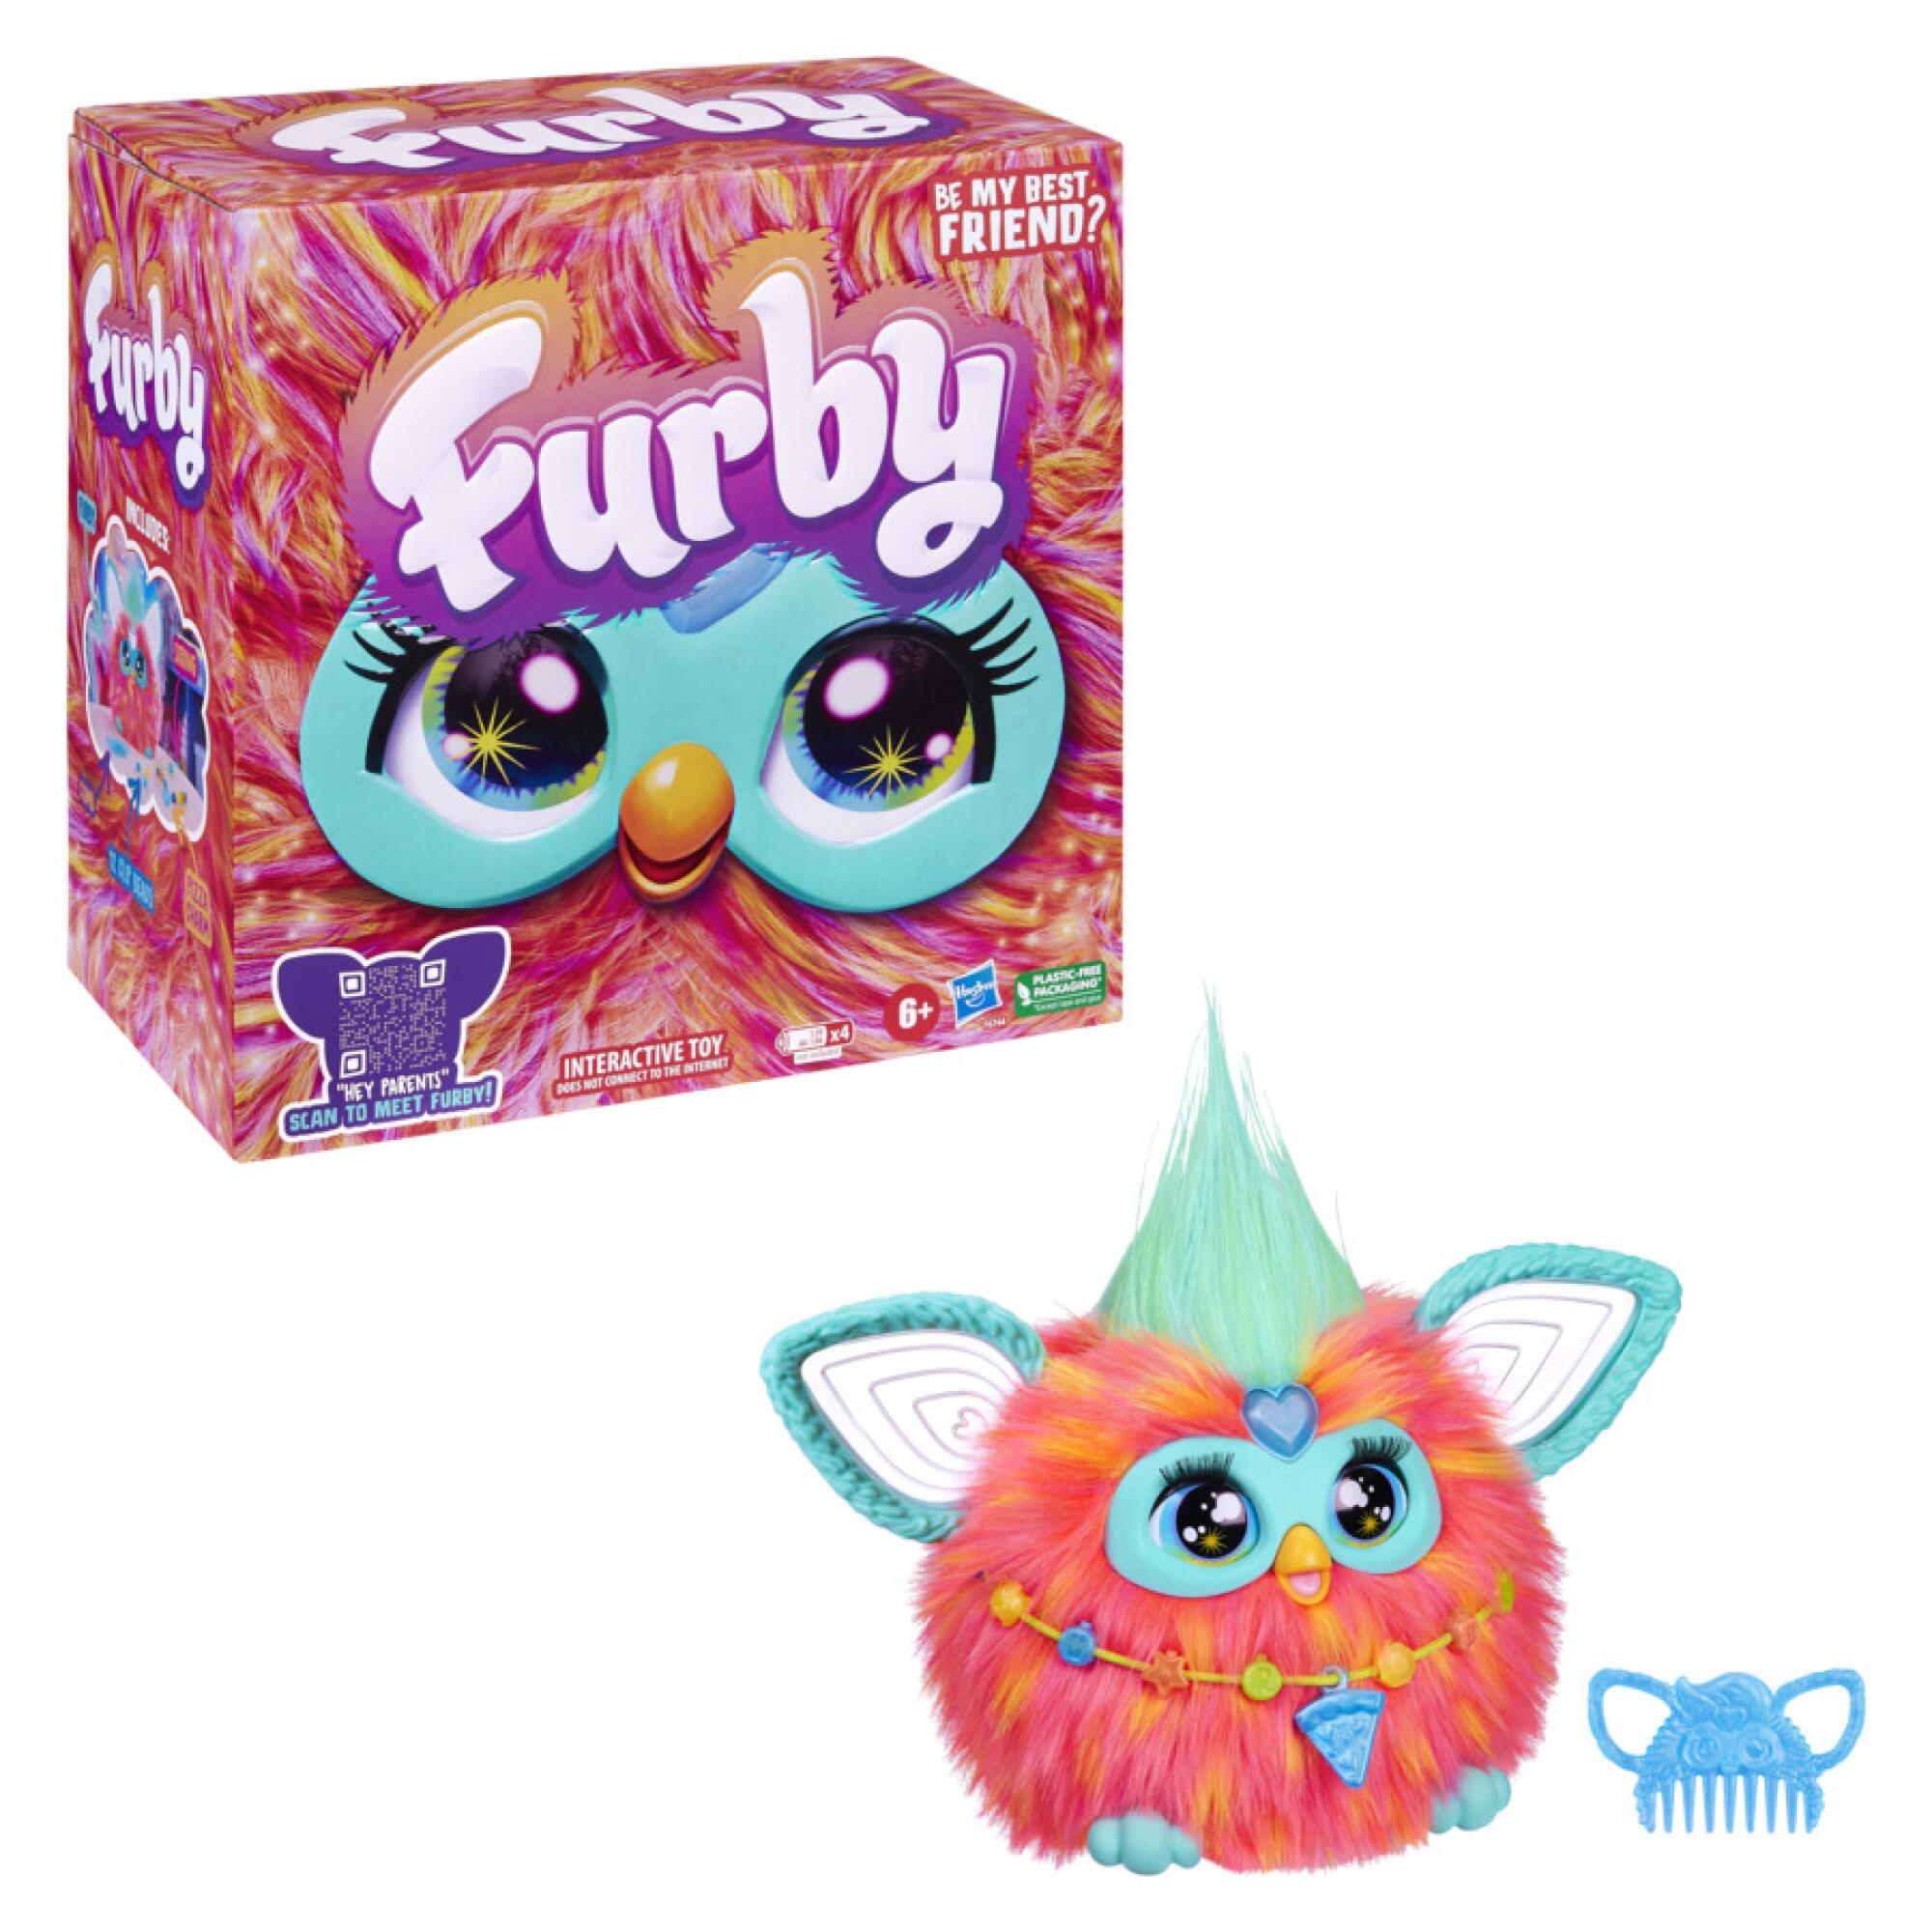 Playing Freeze Dance with the new 2023 Coral Furby! My 5 yo has lots o, furby